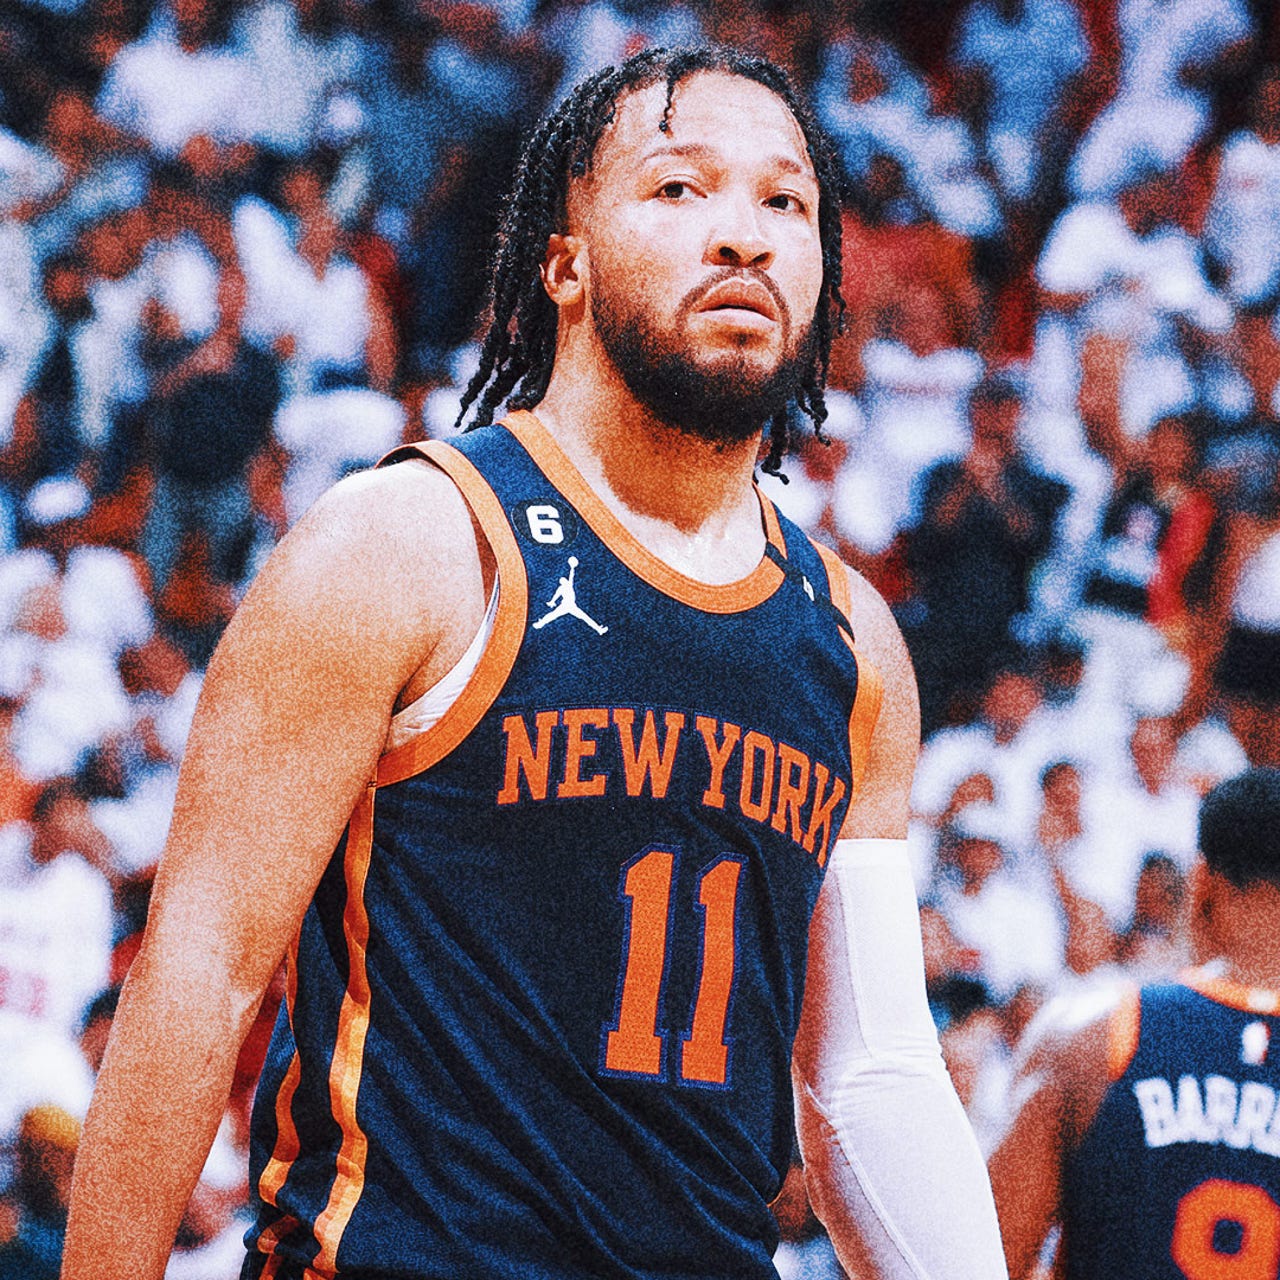 The Knicks need more support for Randle and Brunson - New York